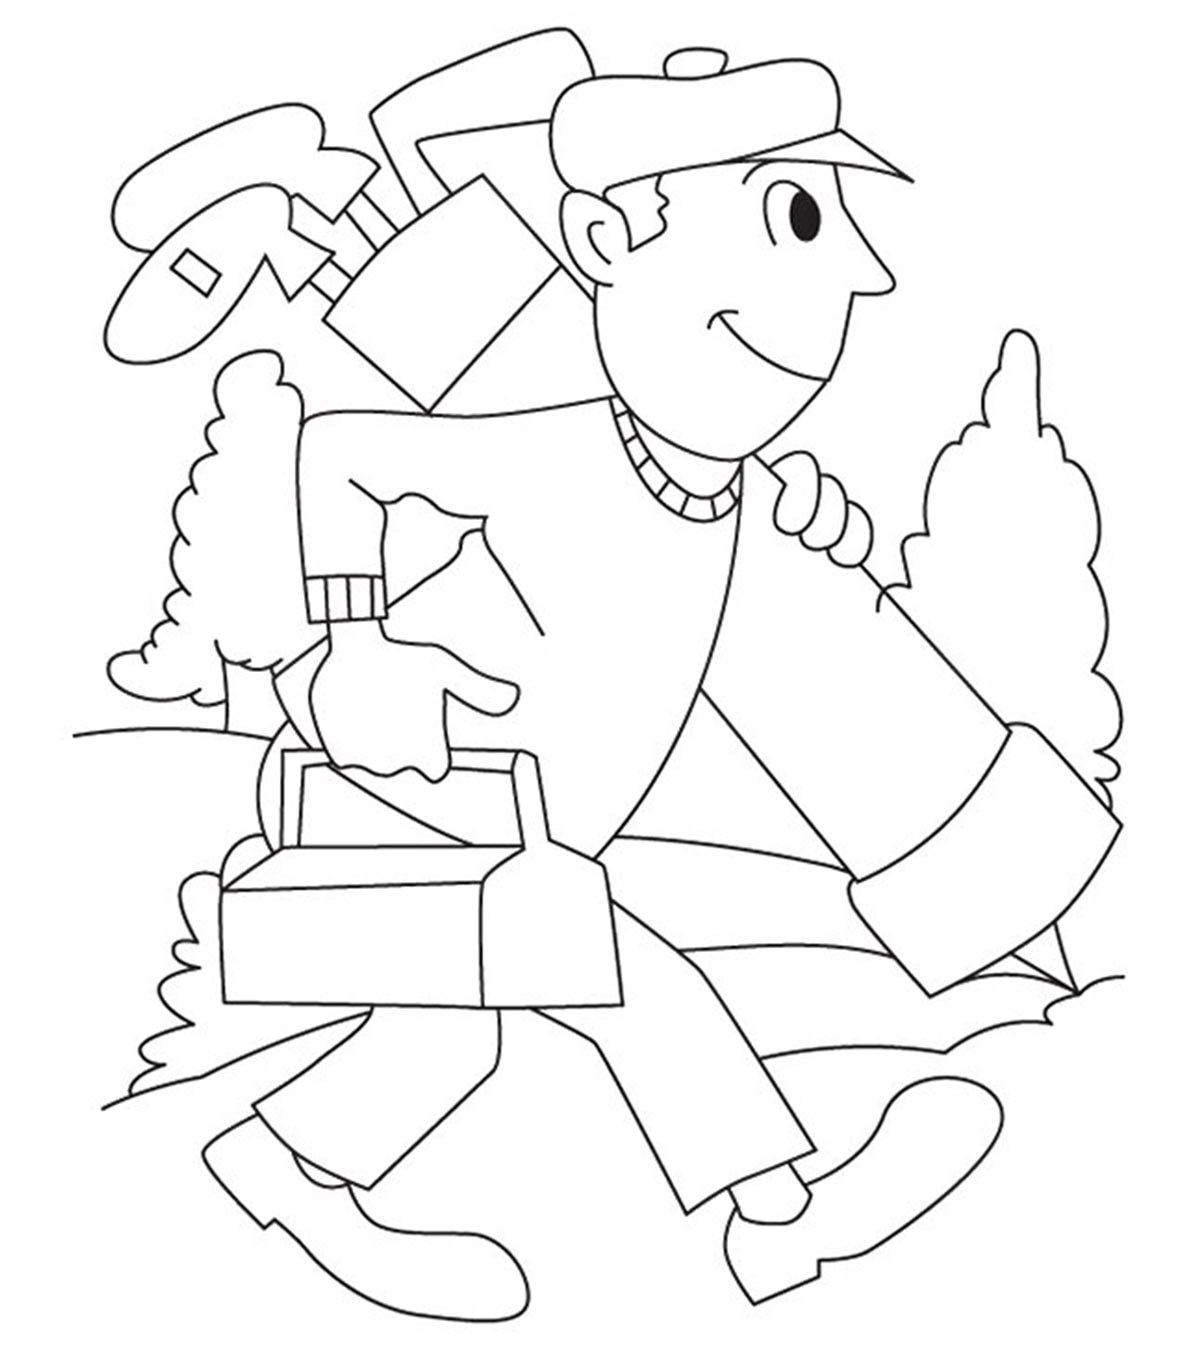 10 Best Golf Coloring Pages For Your Little One_image